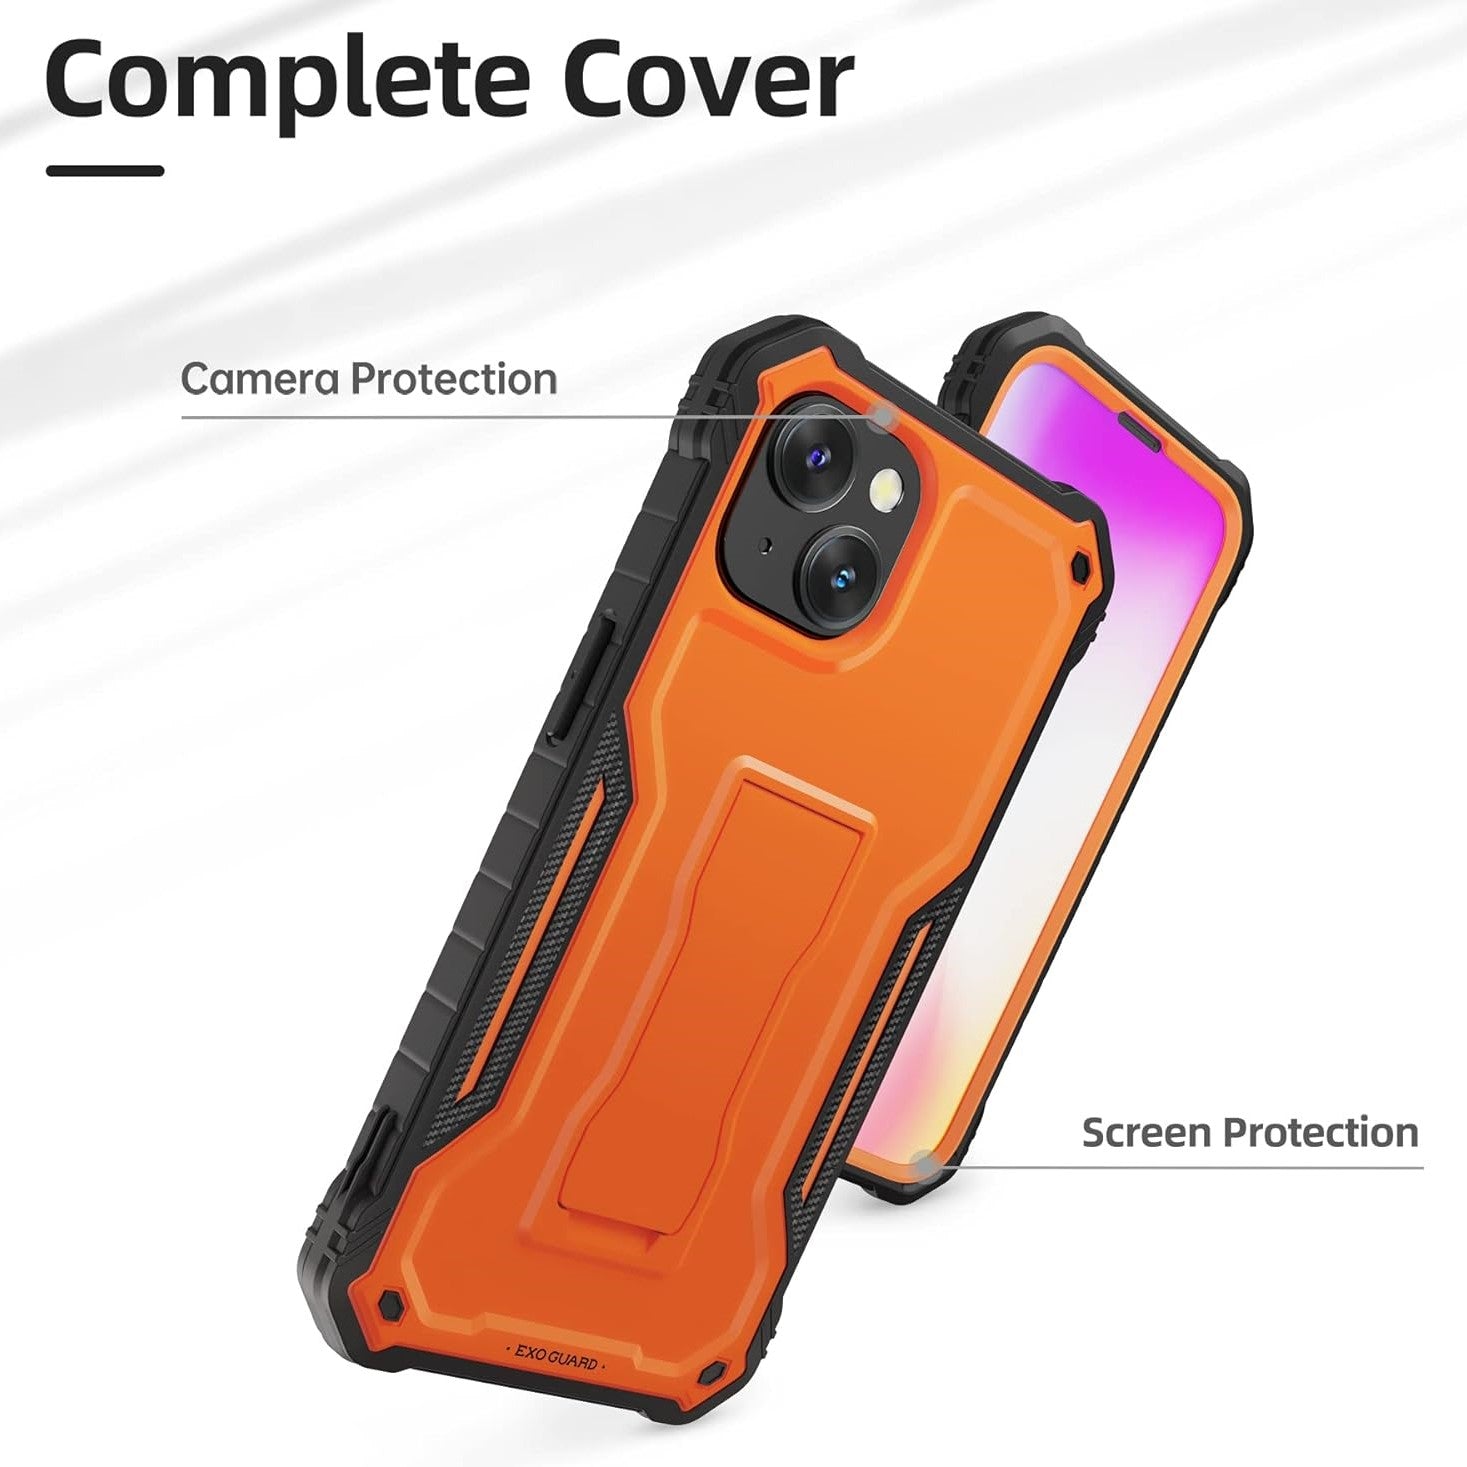 Heavy-Duty Protective Full-Body Metal Case with Foldable Stand for iPhone